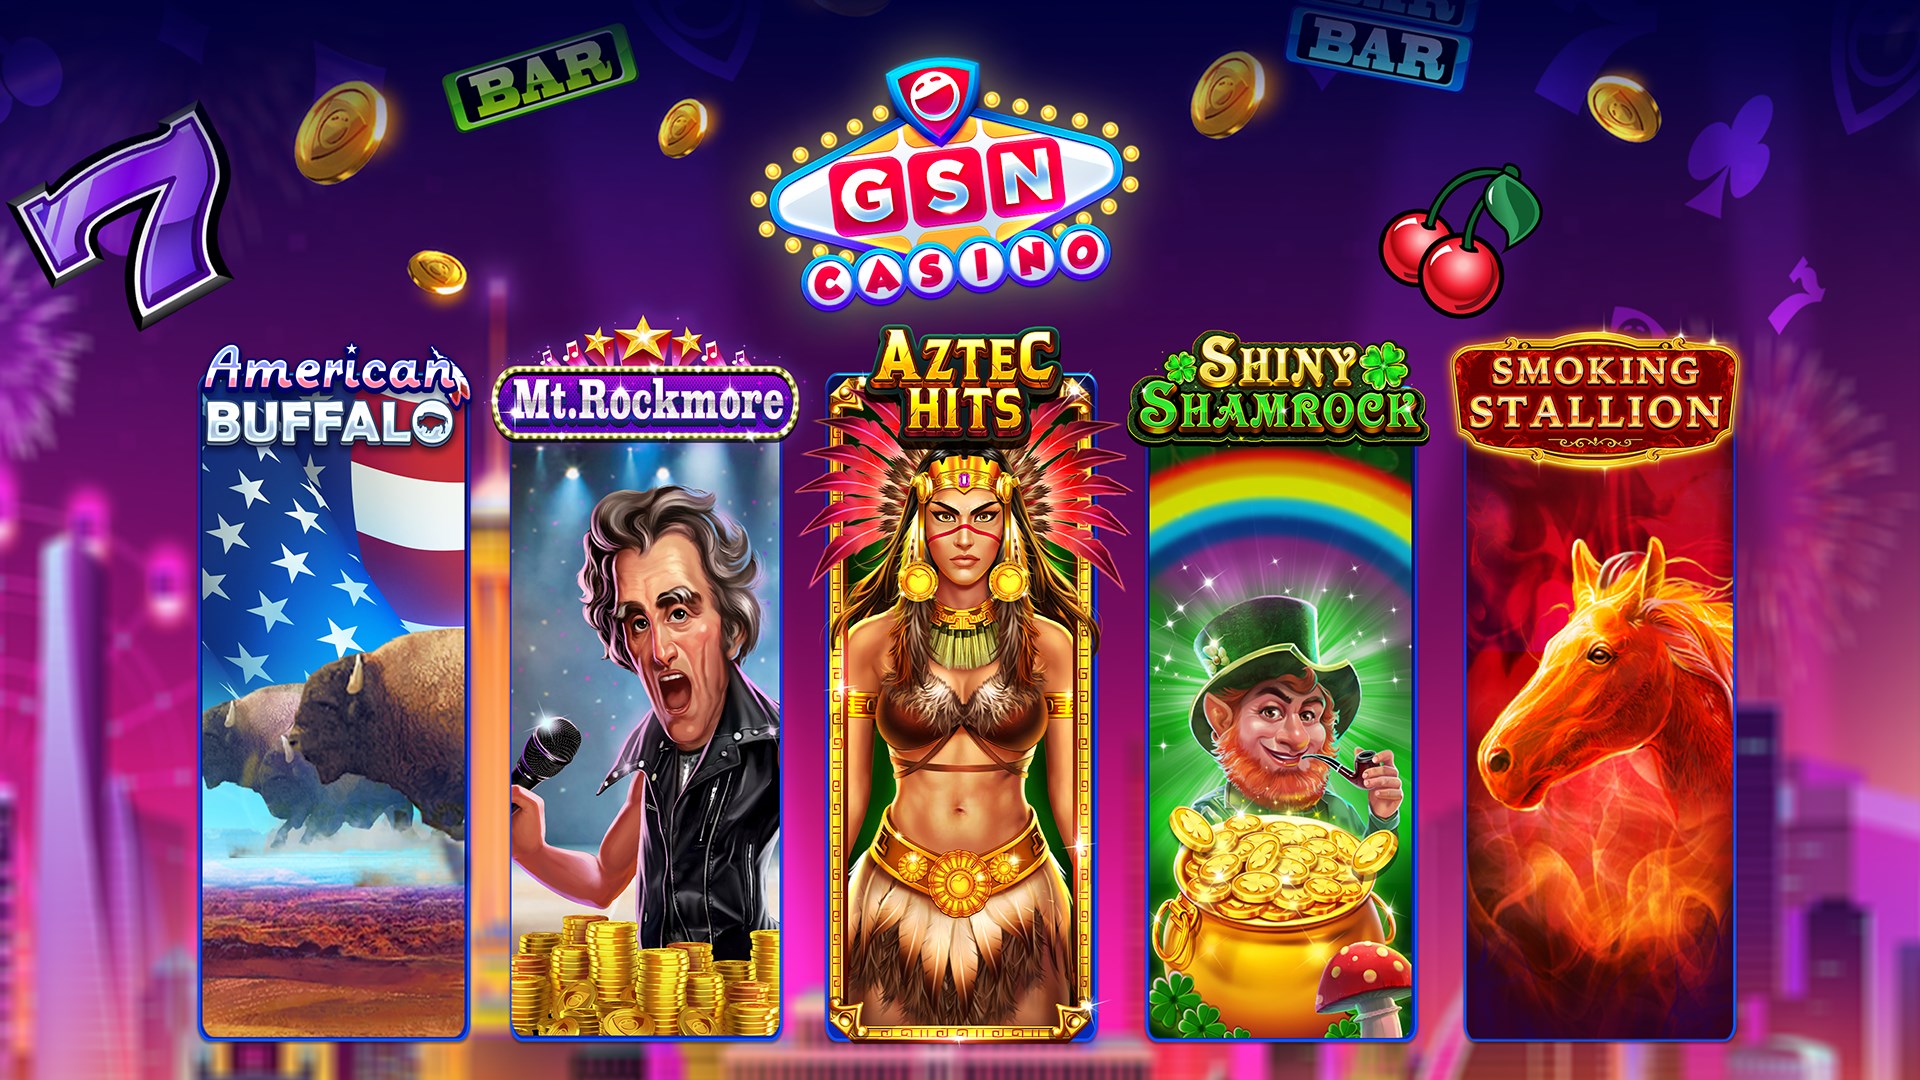 New Online Casino Game Releases – Play Latest Online Slots